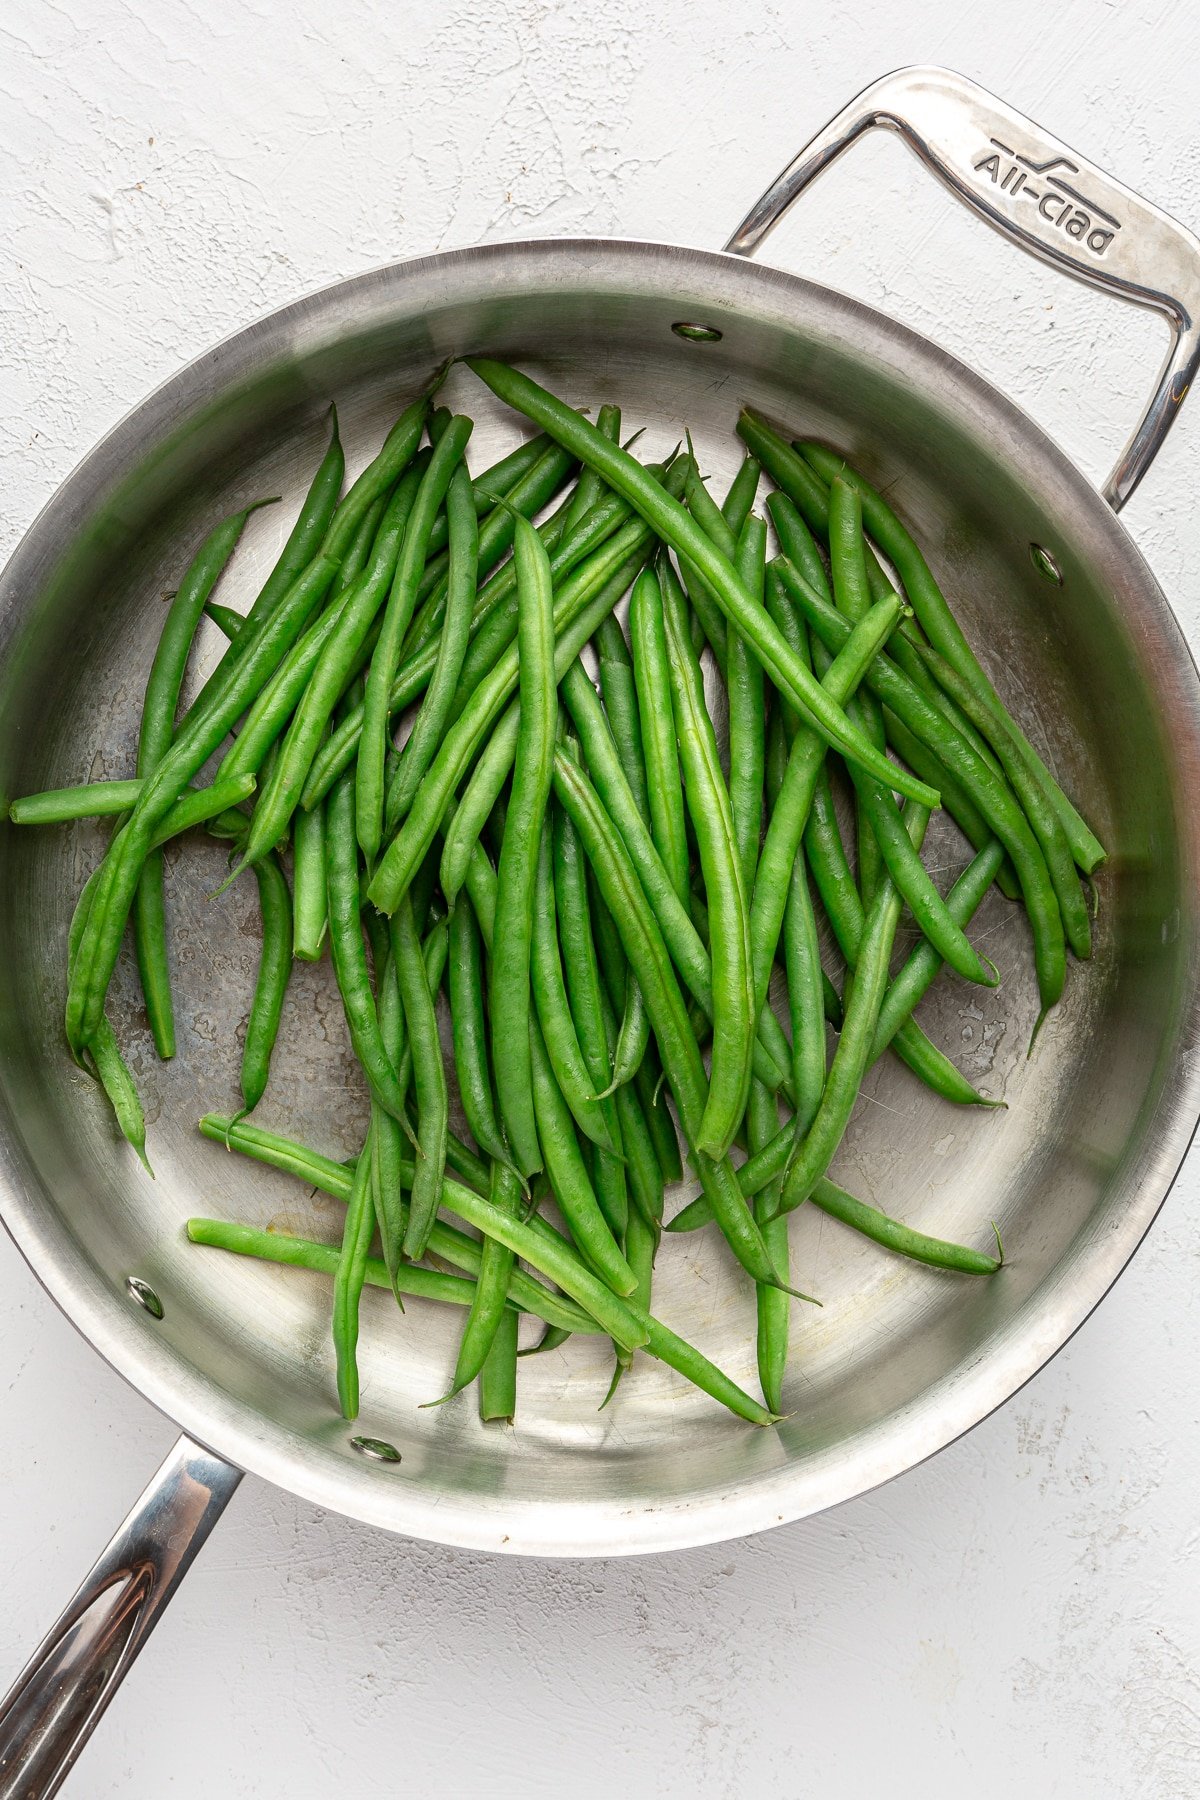 Green beans have been placed in the pan with water.